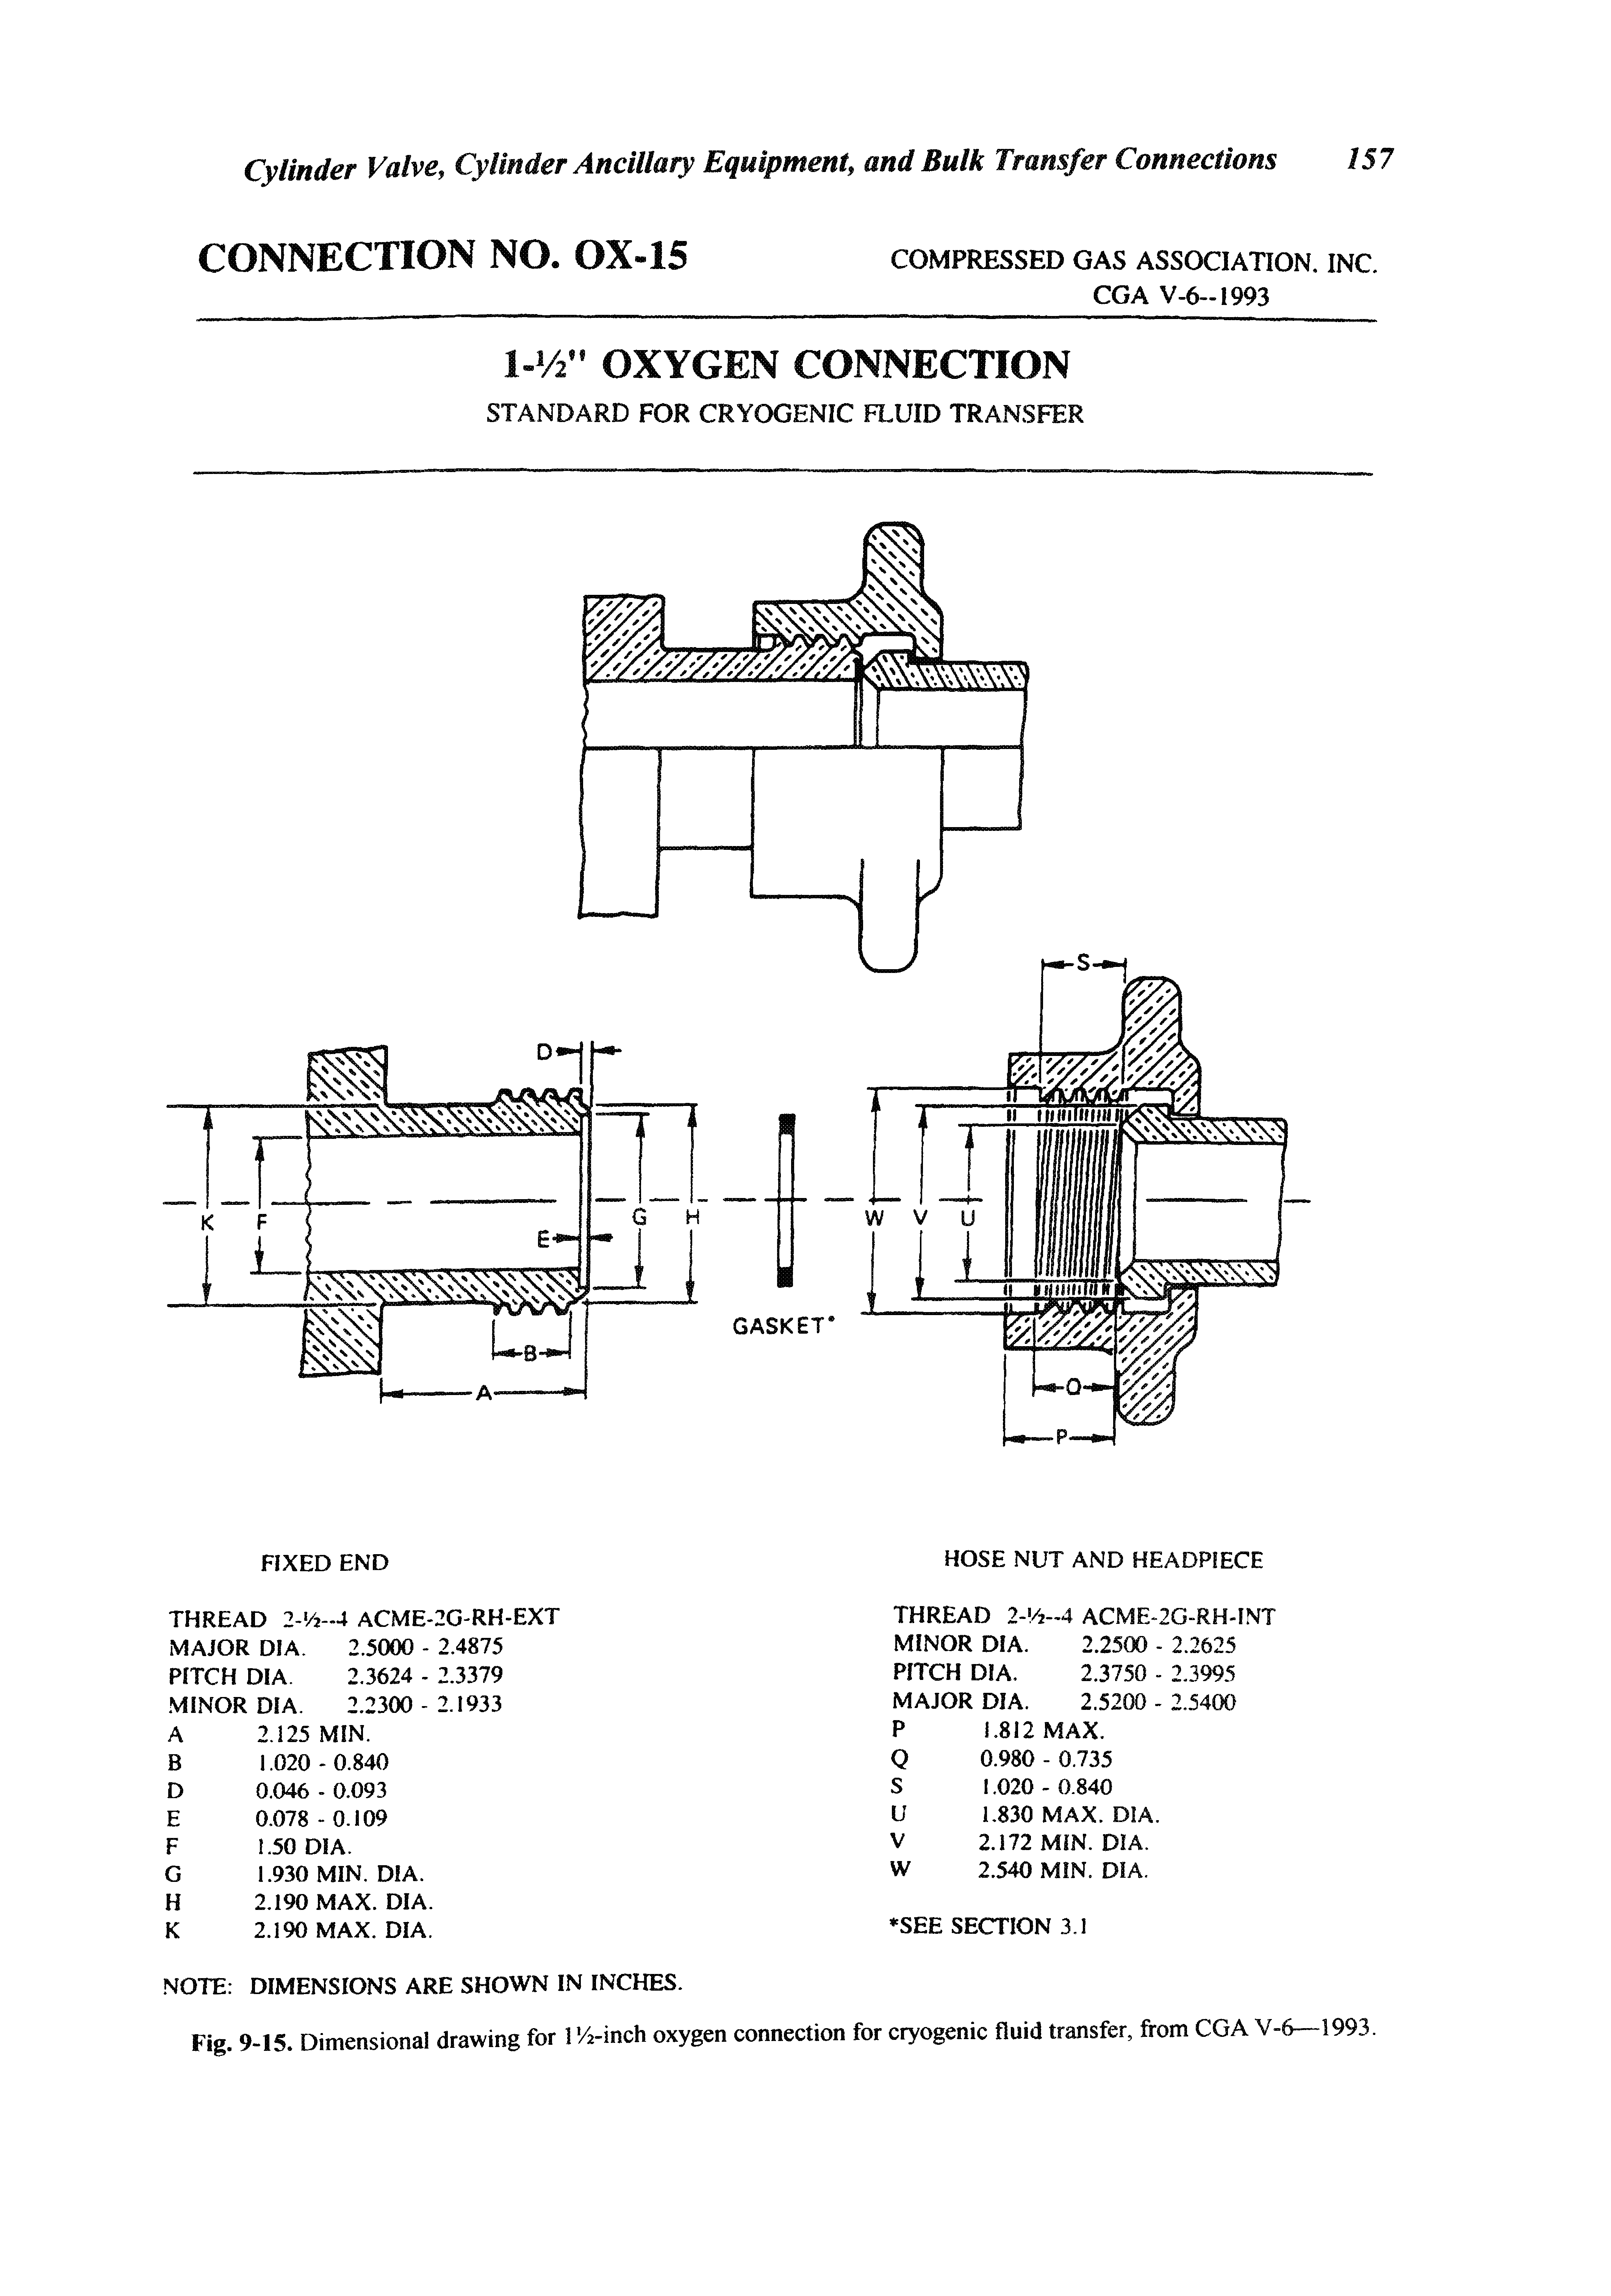 Fig. 9-15. Dimensional drawing for 1 /2-inch oxygen connection for cryogenic fluid transfer, from CGA V-6—1993.